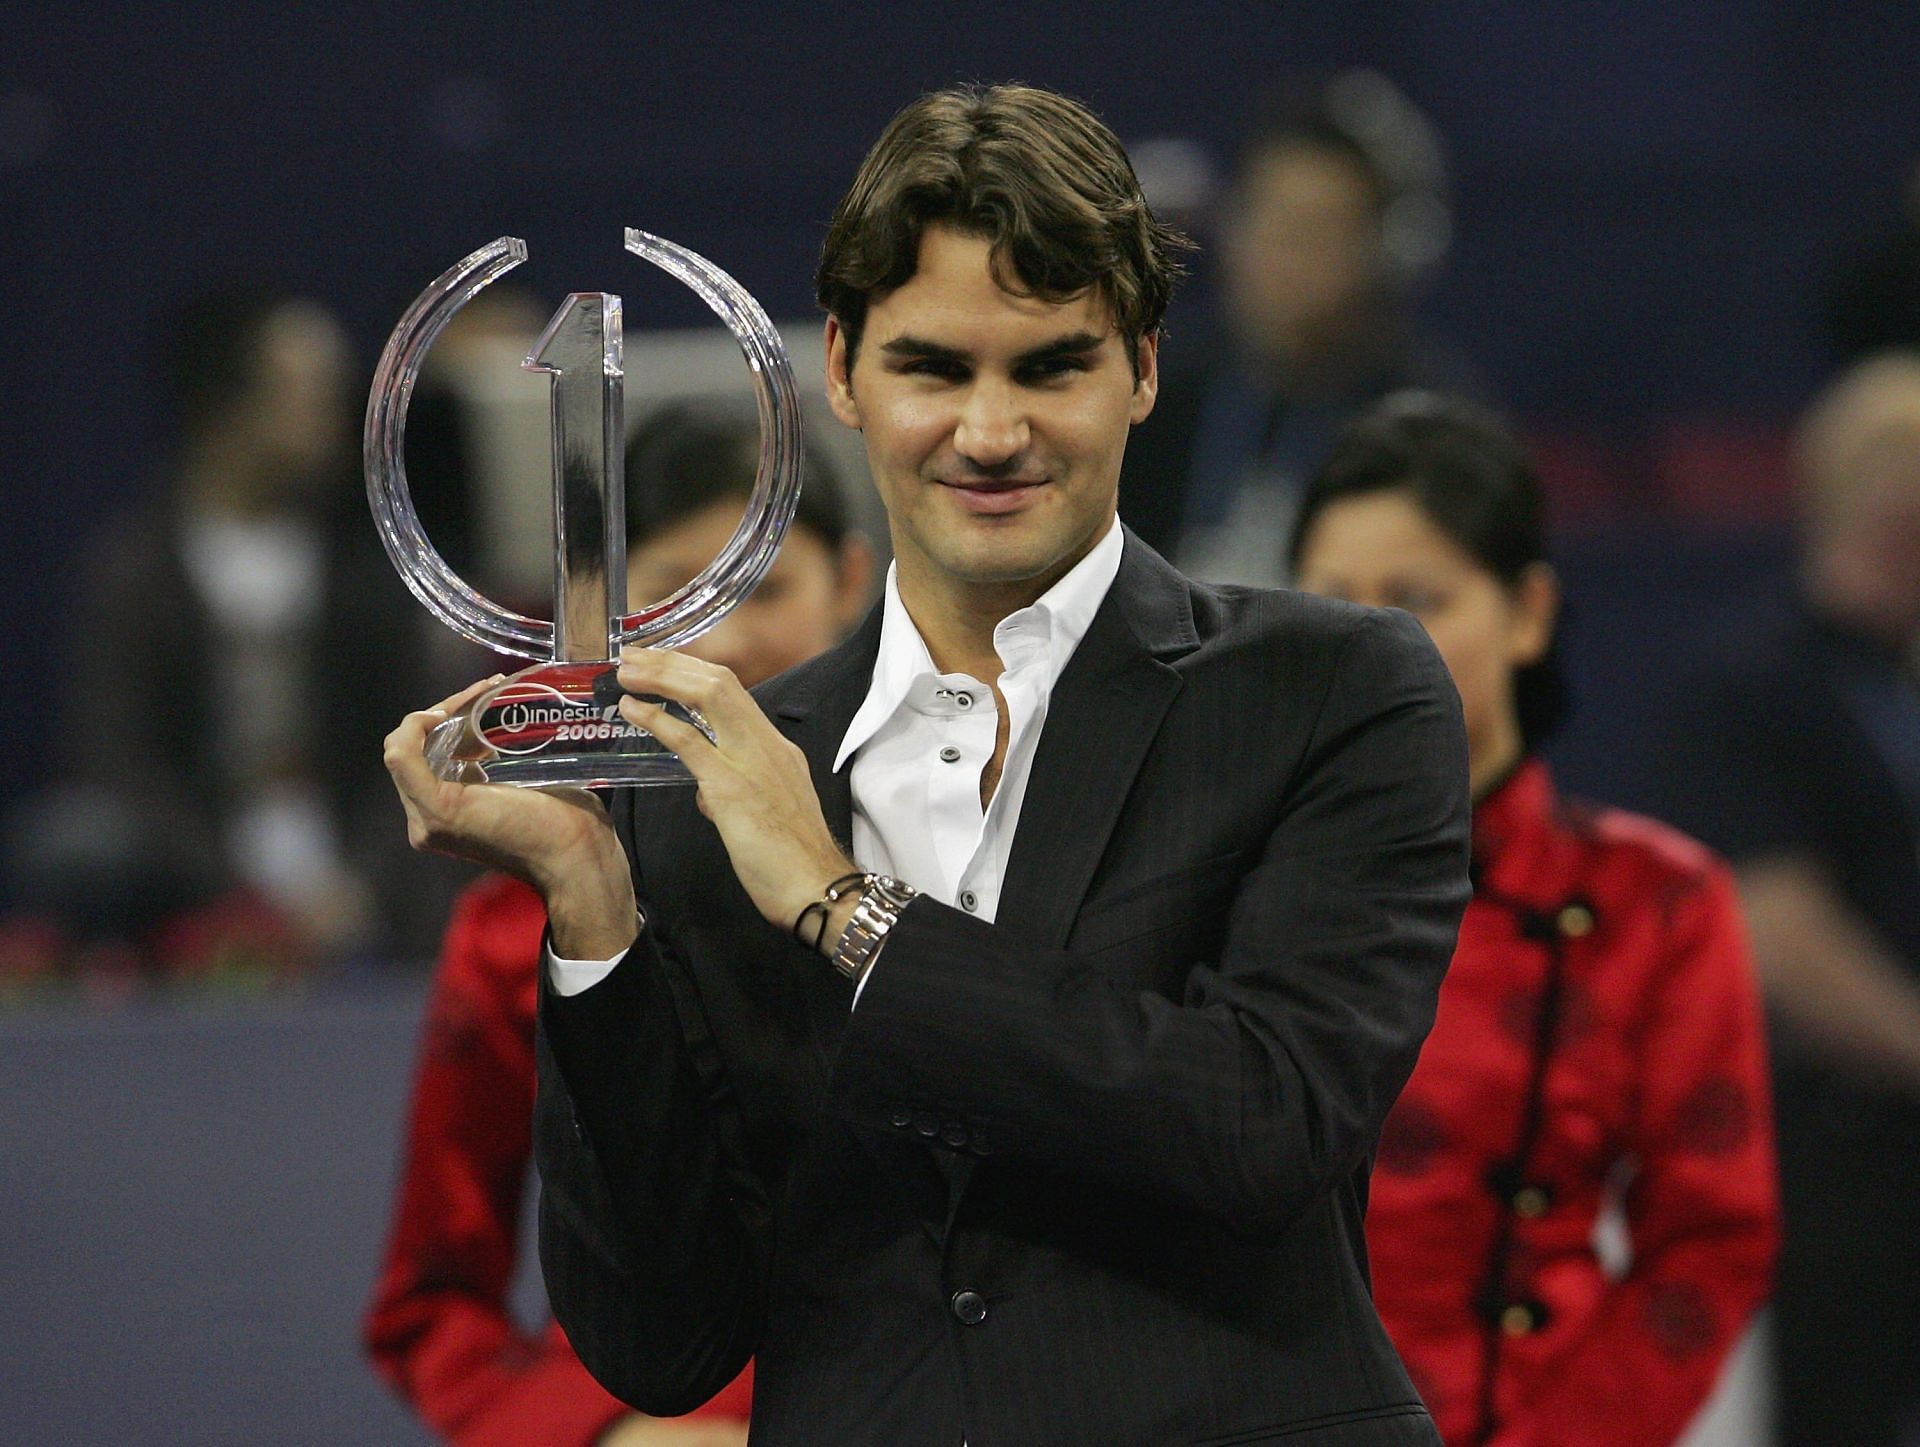 Roger Federer with his trophy for topping the 2006 ATP rankings at the 2006 Tennis Masters Cup